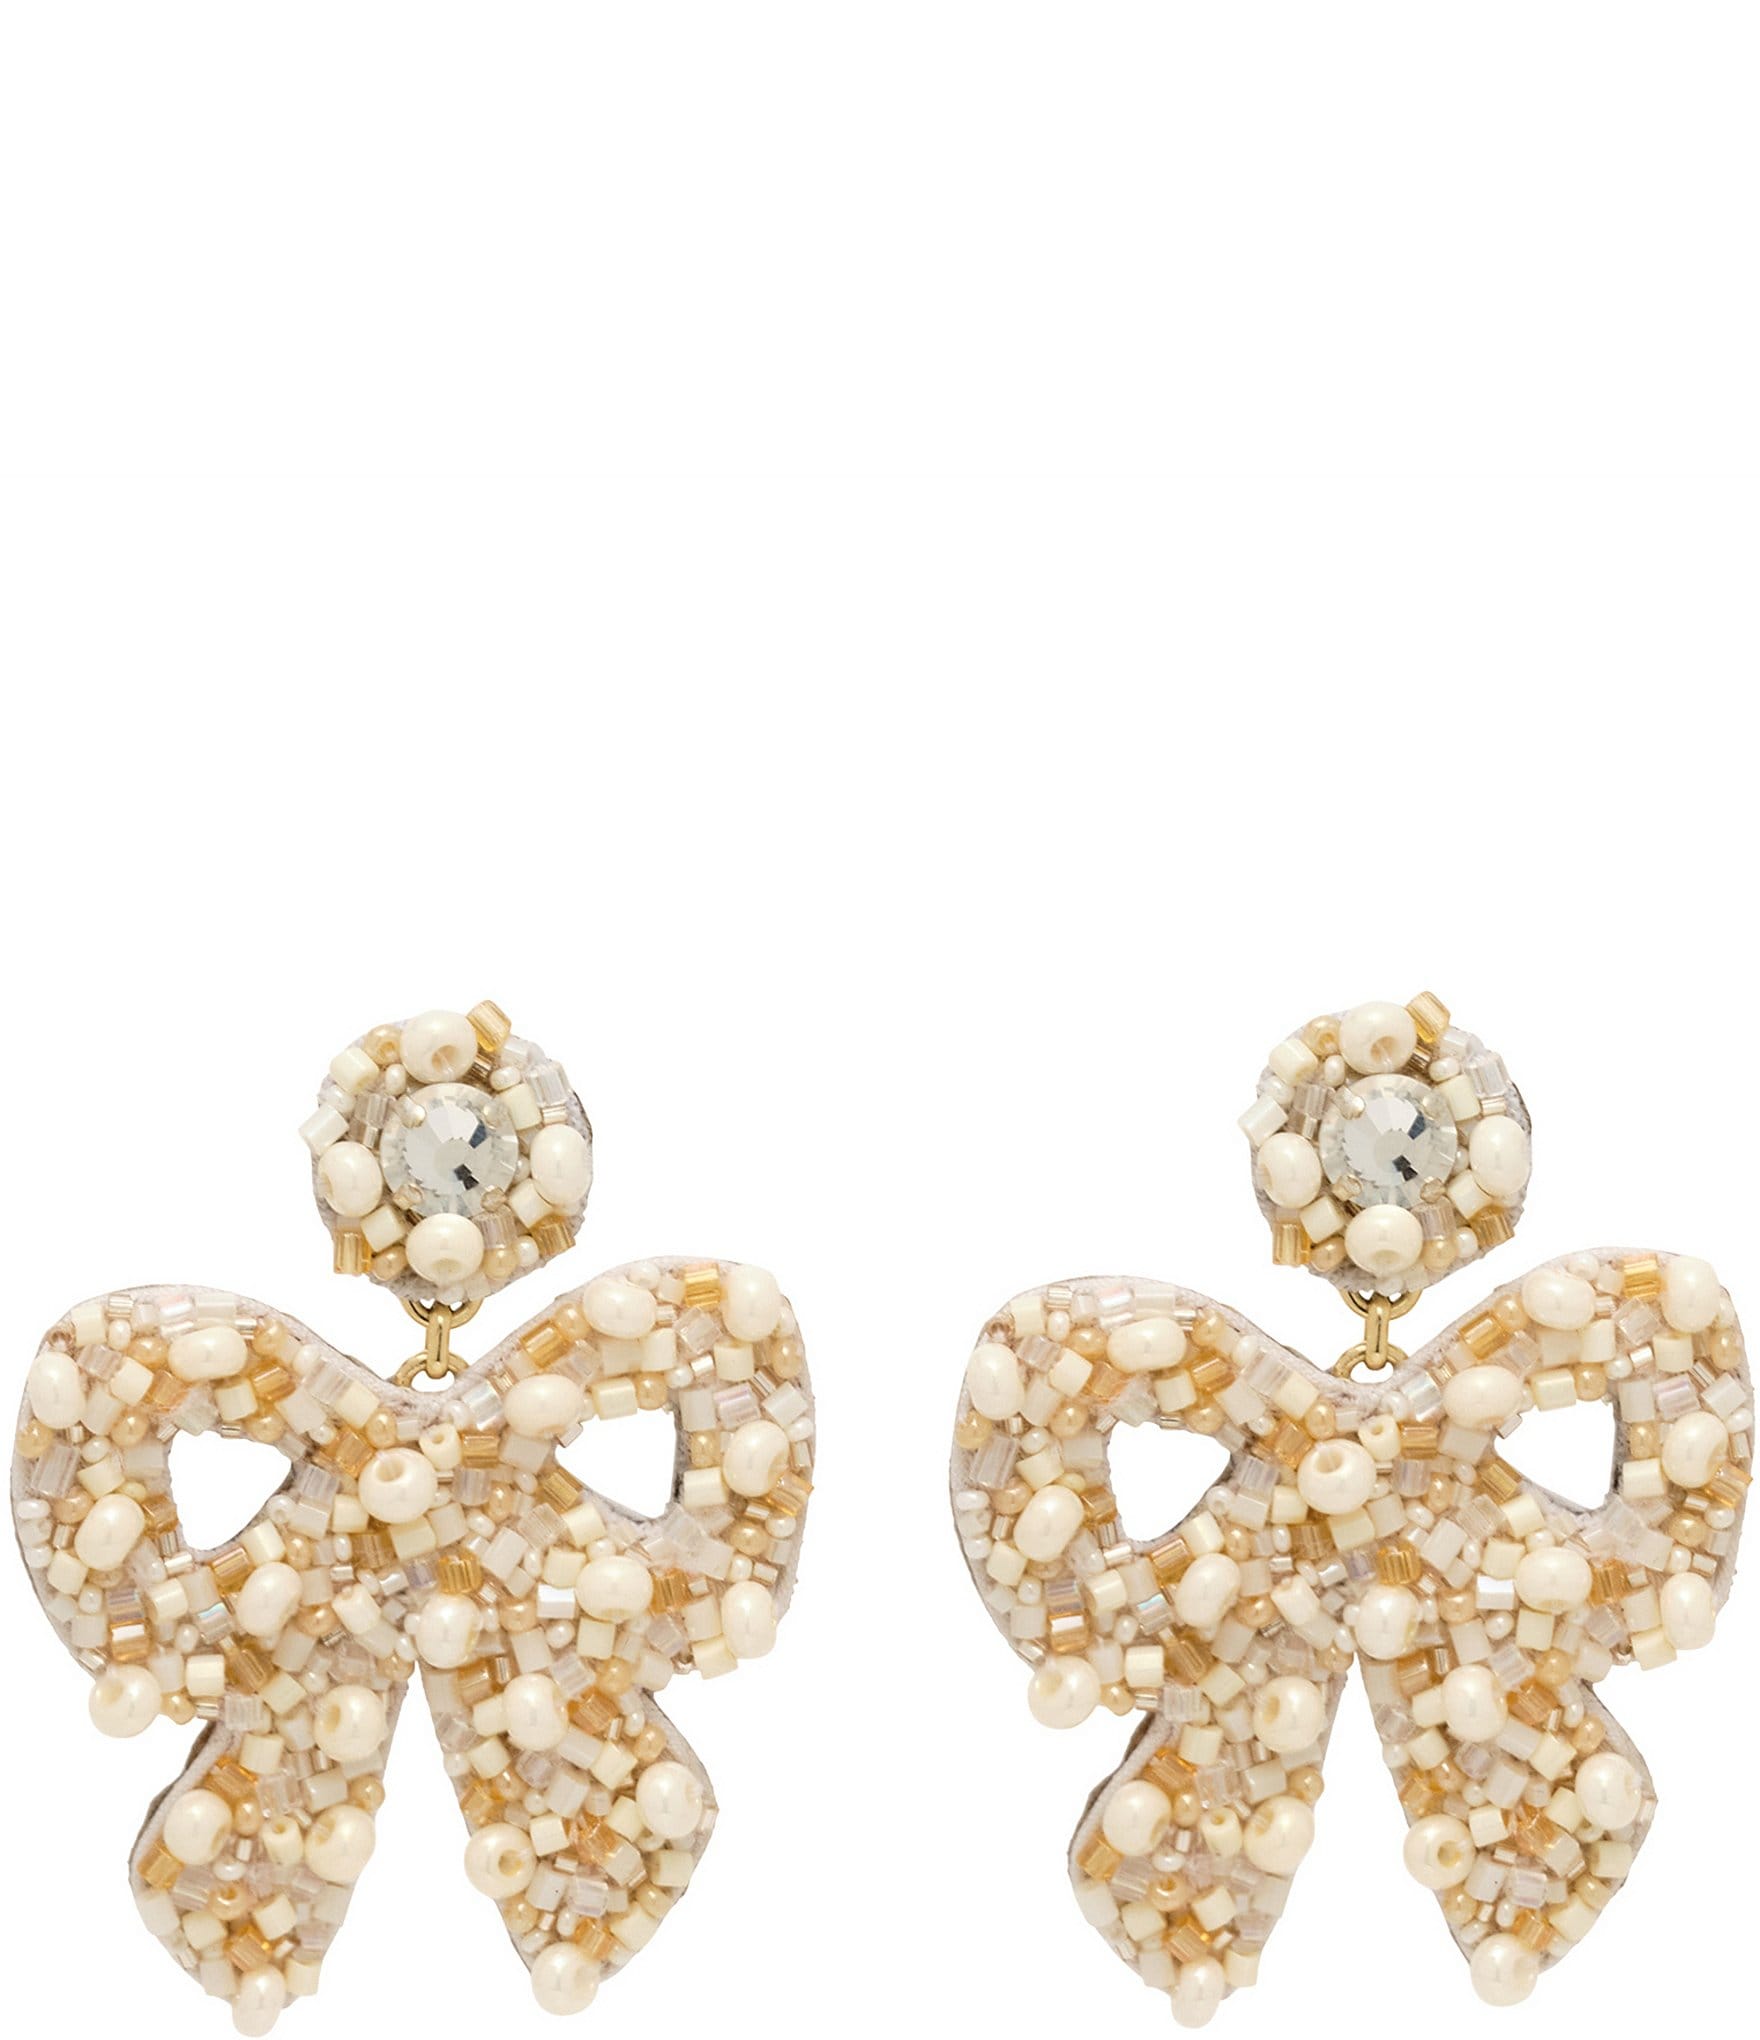 Little Bow Earrings Gold & Pearl – M Donohue Collection